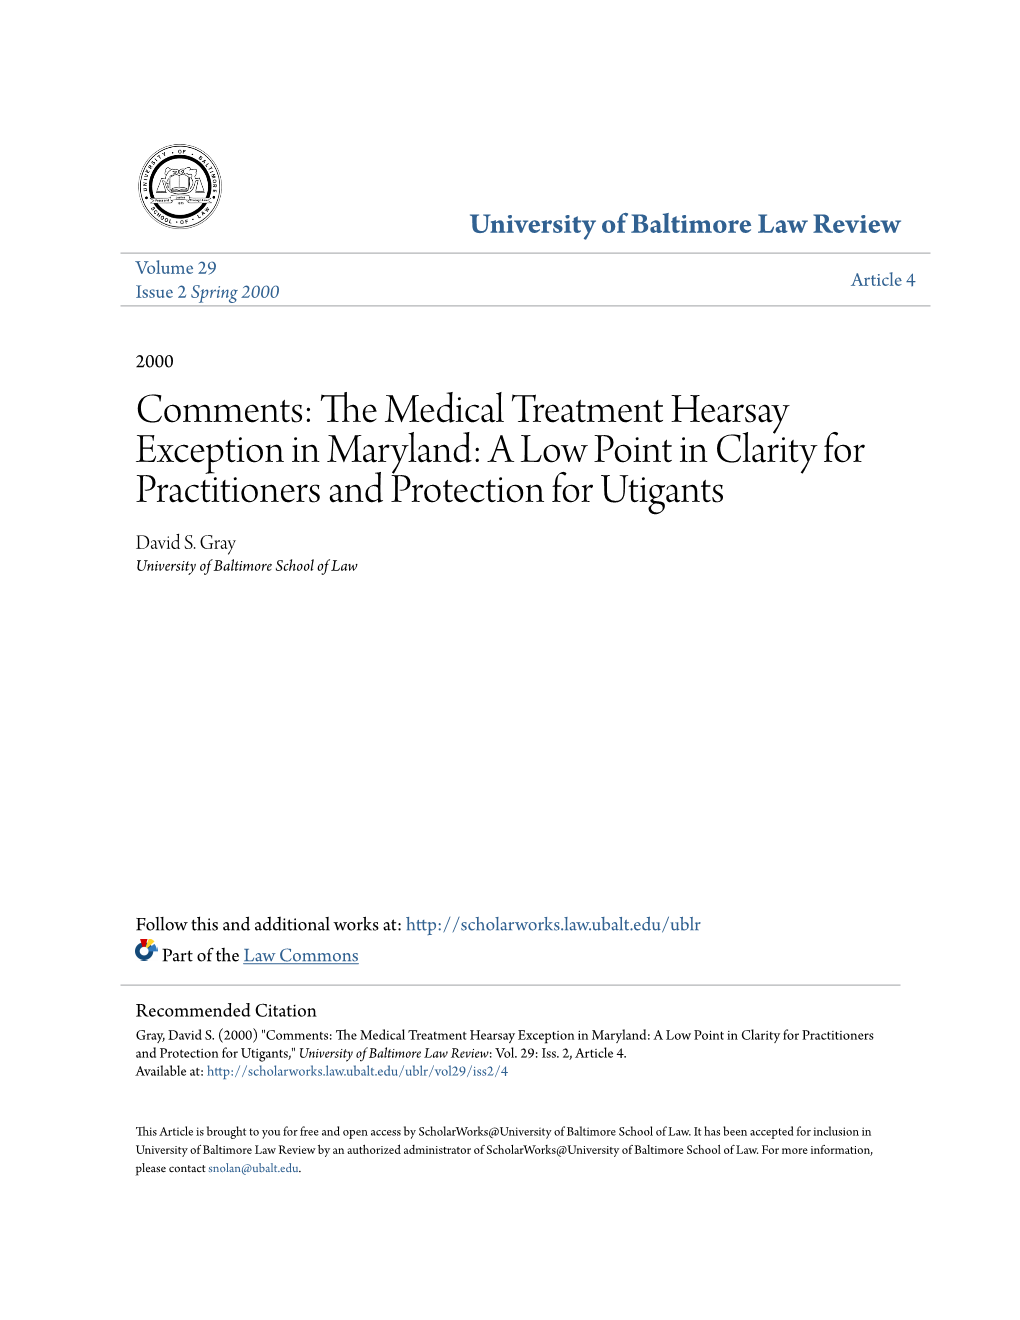 Comments: the Medical Treatment Hearsay Exception in Maryland: A